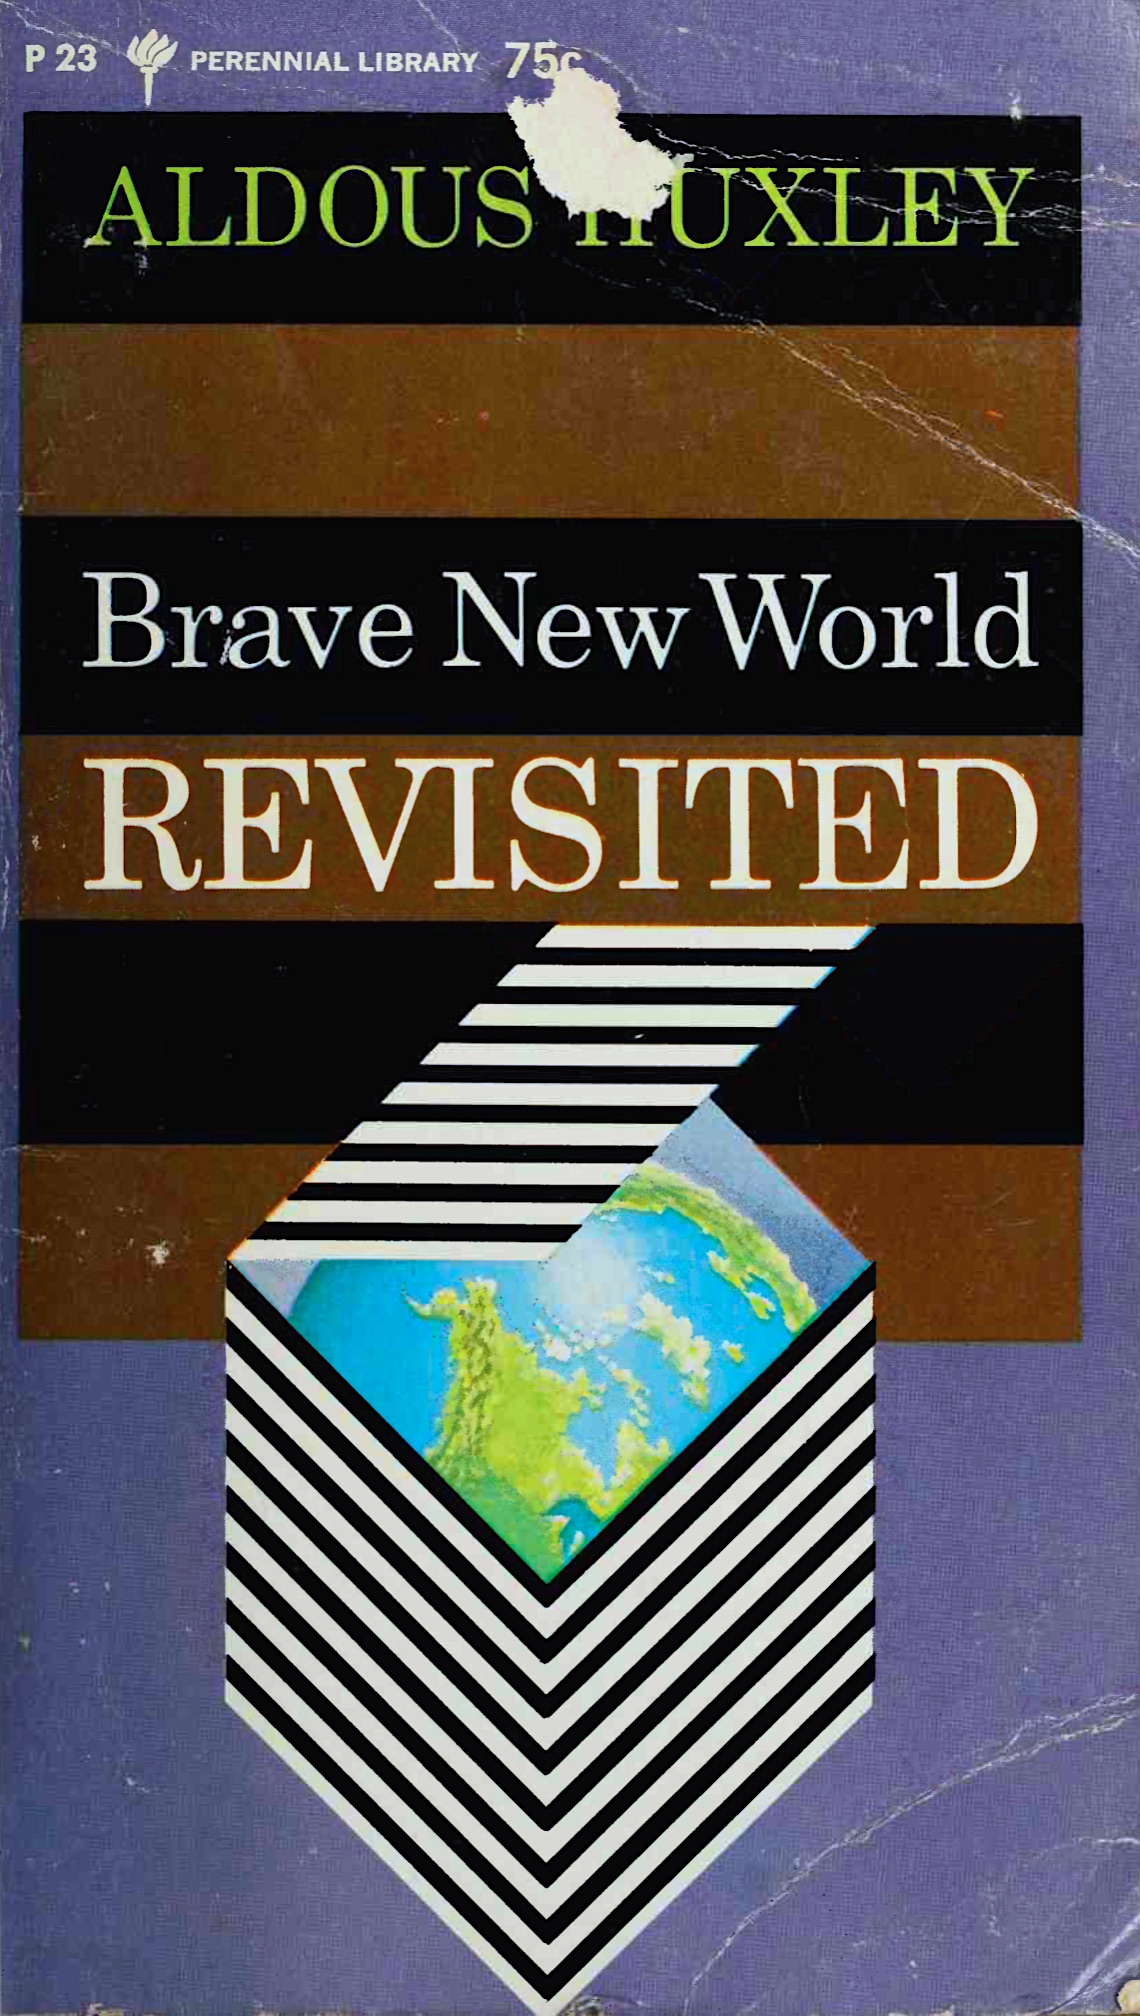 Front cover of Brave New World Revisited (1958) by Aldous Huxley